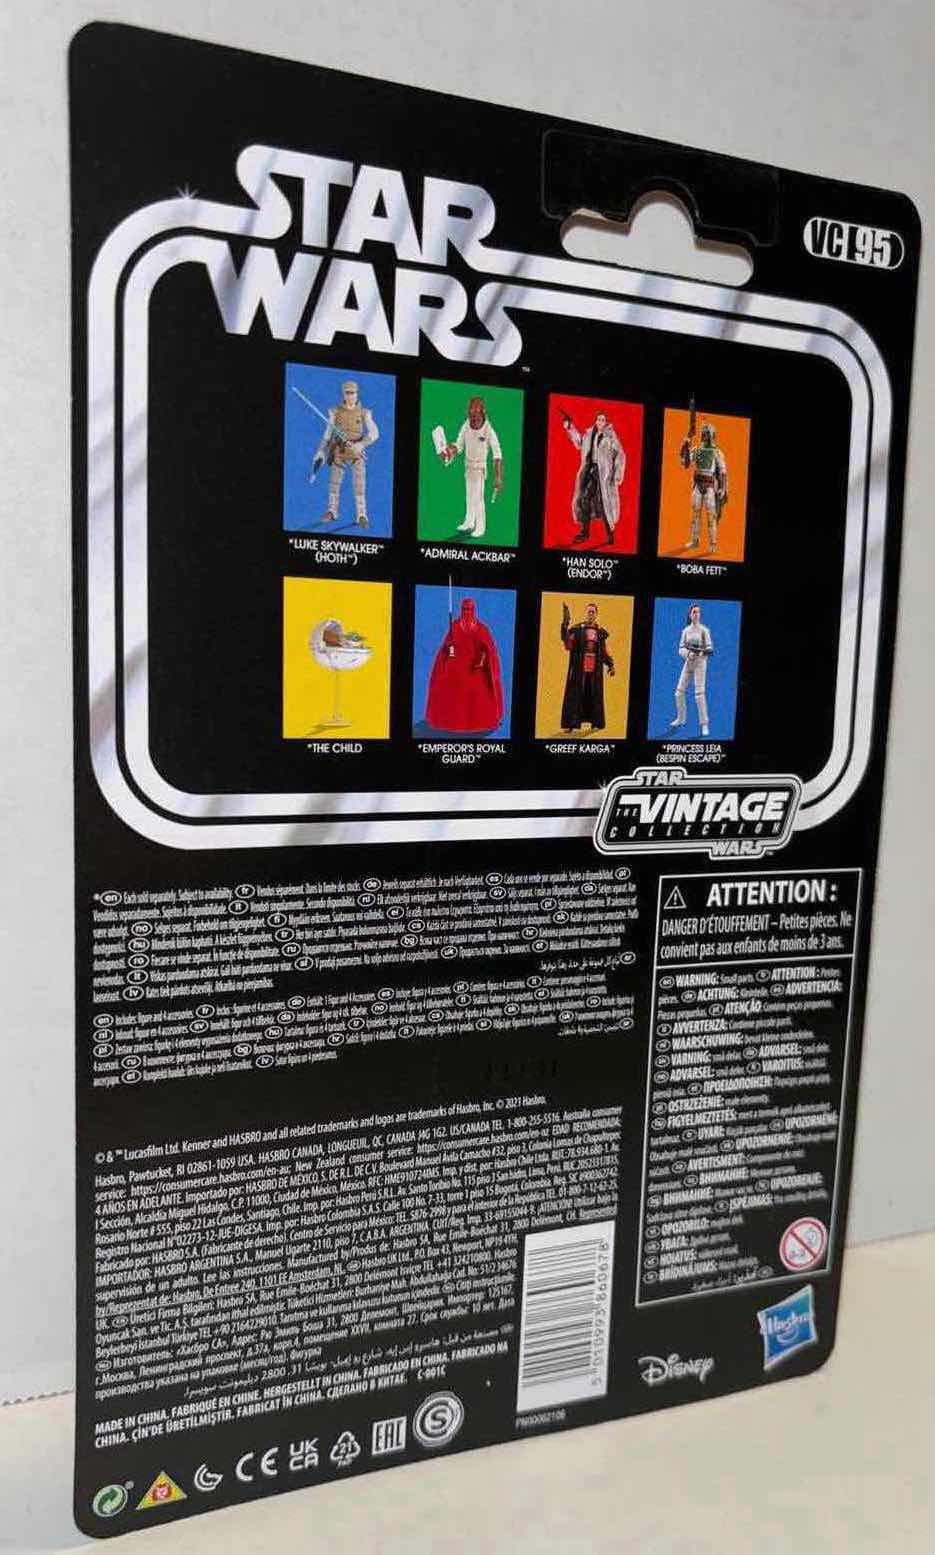 Photo 2 of NEW STAR WARS THE EMPIRE STRIKES BACK 3.75” THE VINTAGE COLLECTION ACTION FIGURE & ACCESSORIES, “LUKE SKYWALKER (HOTH)” (1)